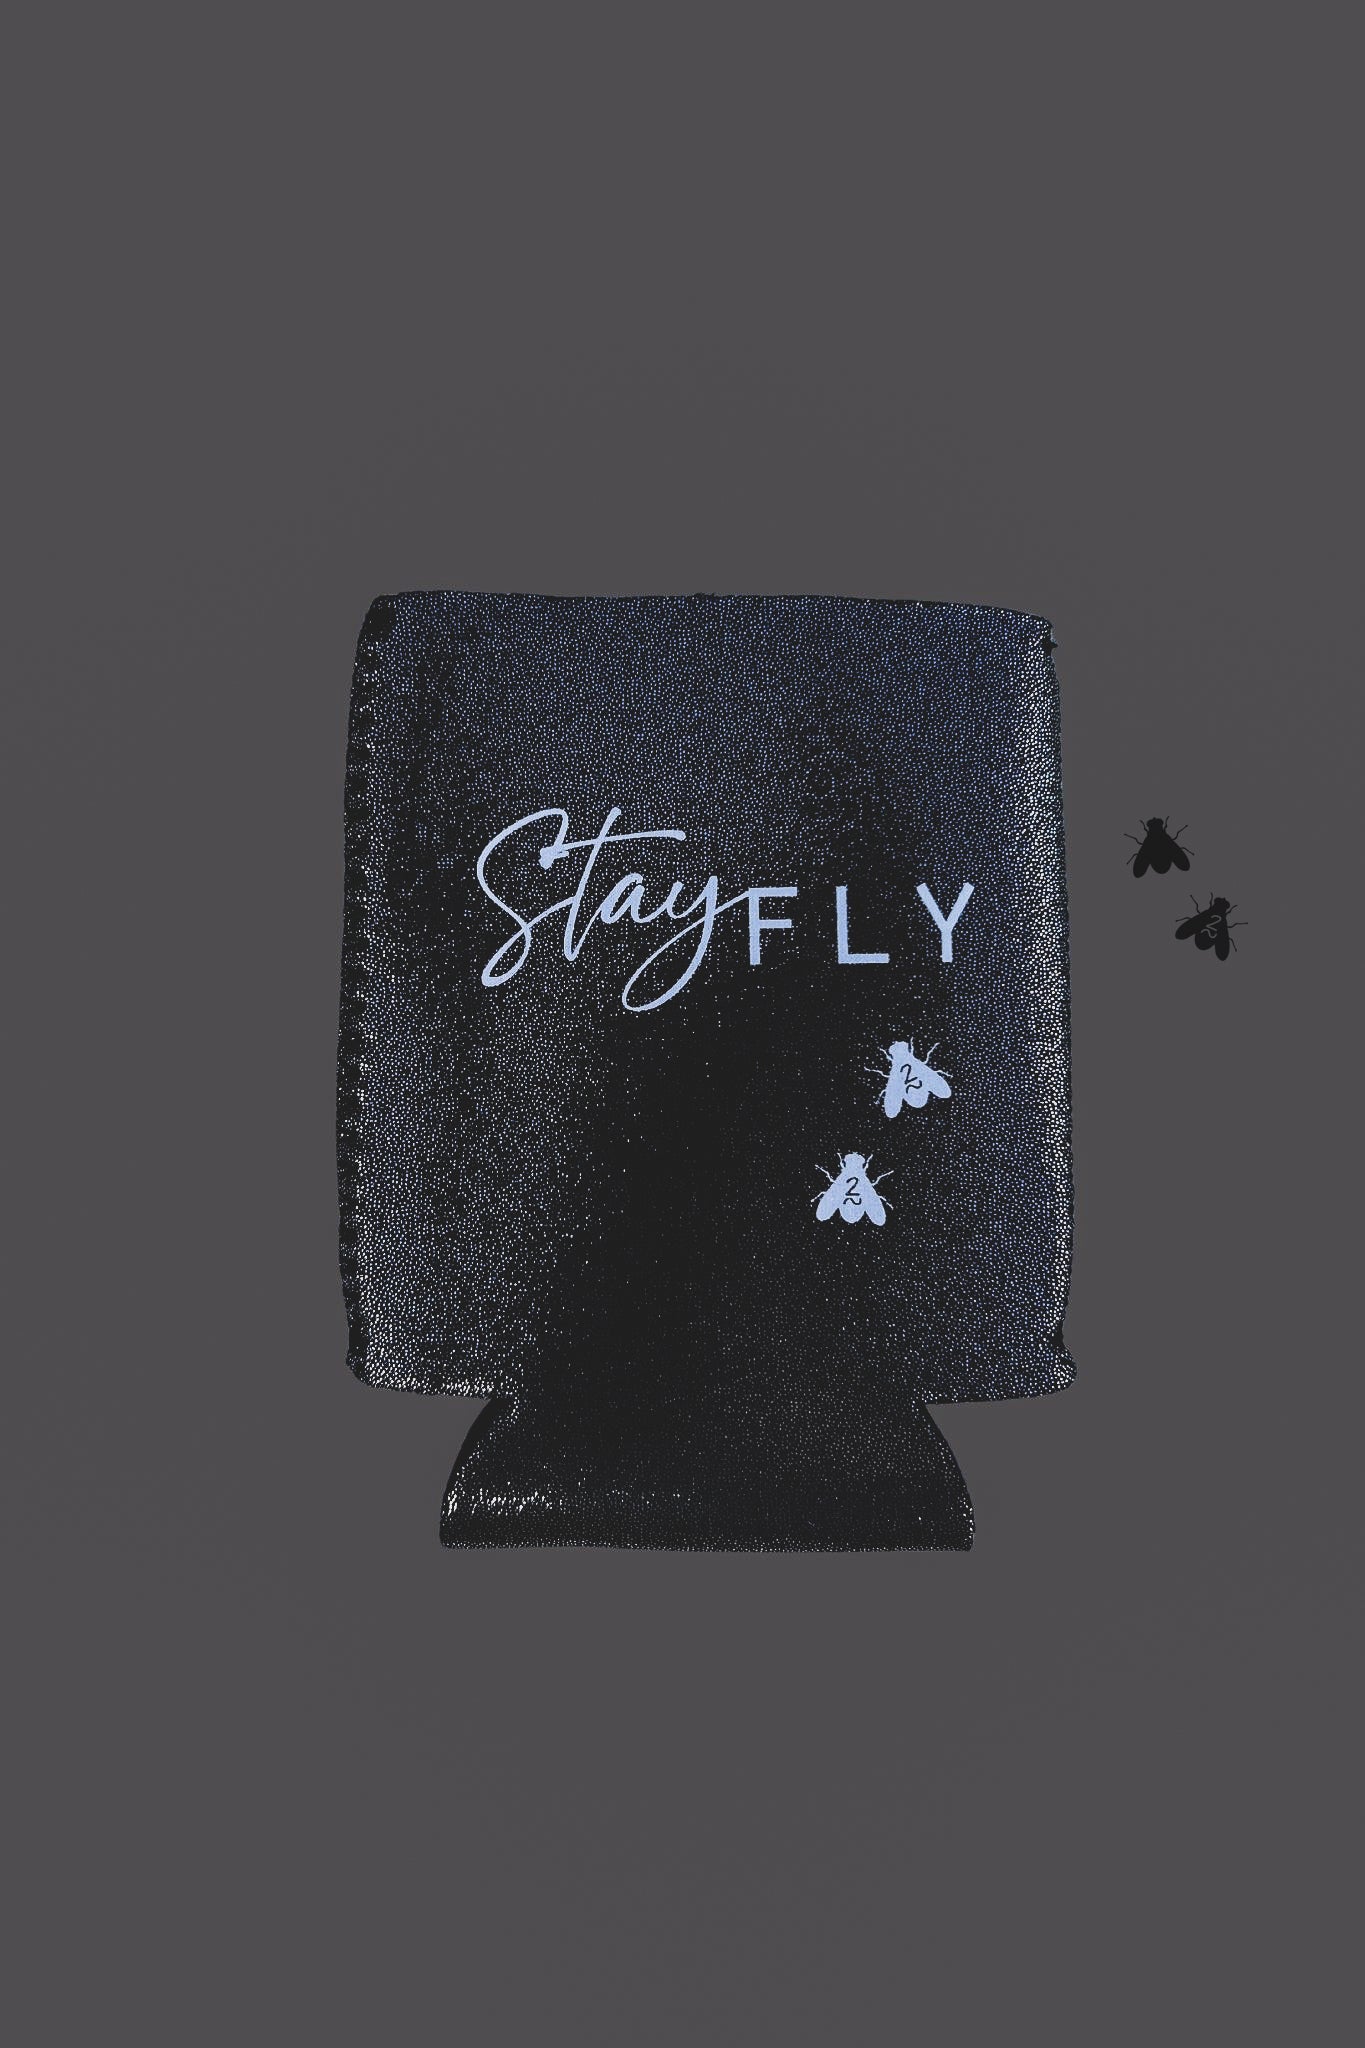 STAY FLY [SHORT]